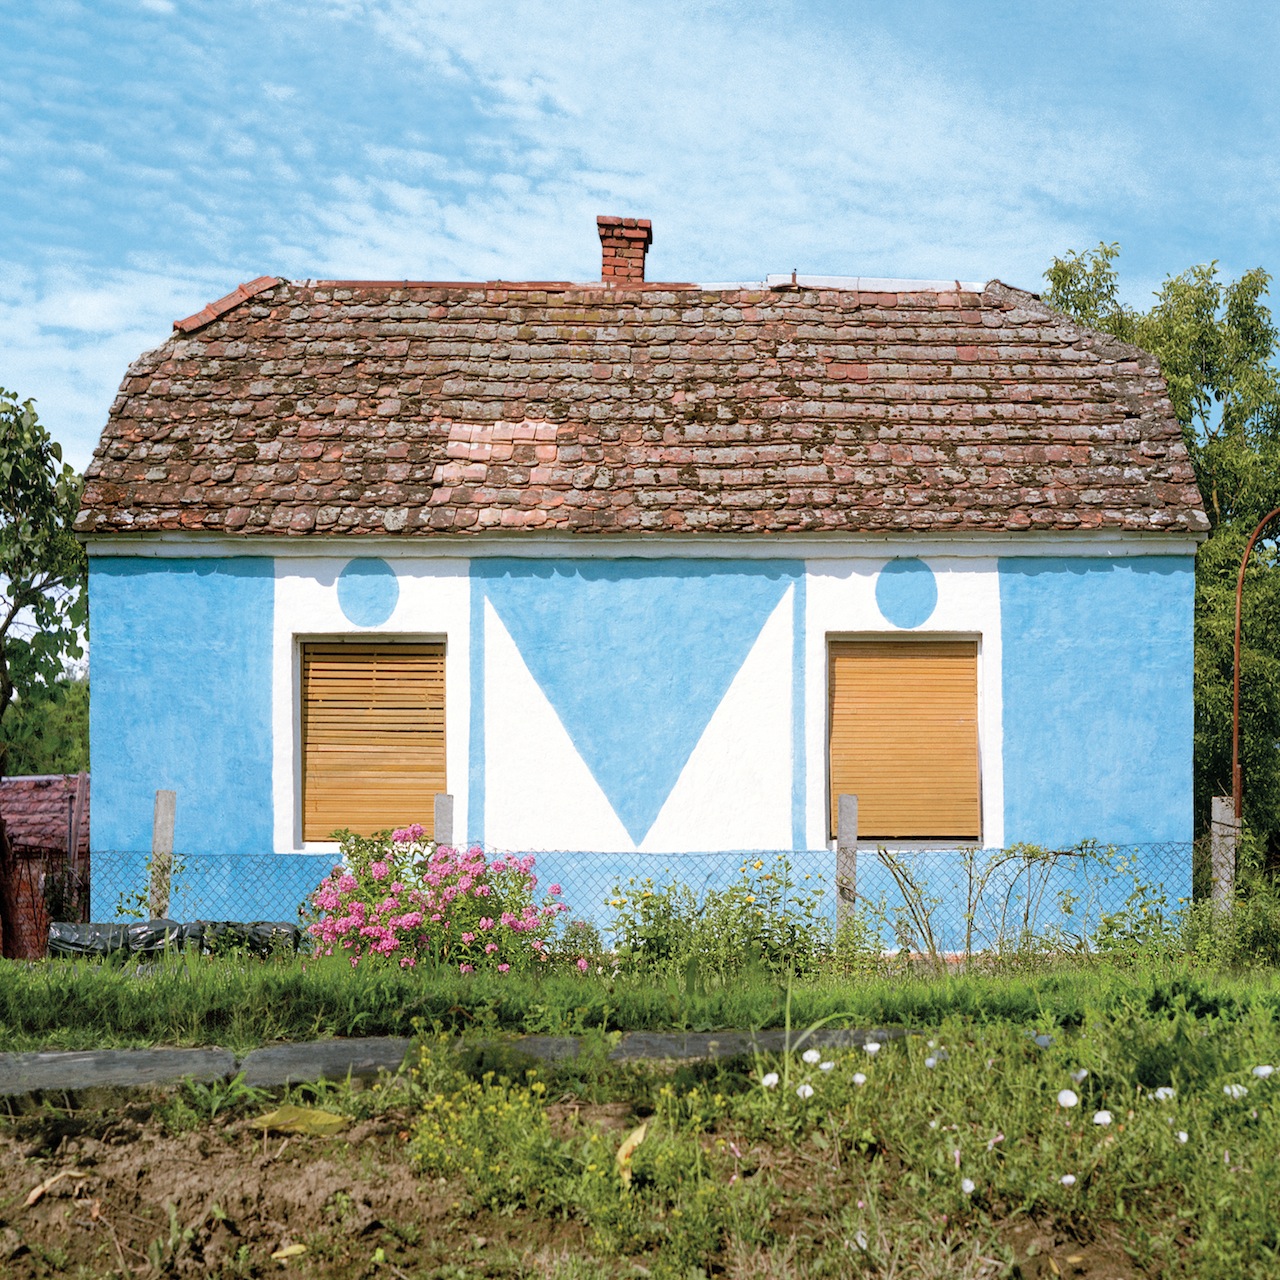 How Hungary's Painted Homes Rebelled Against the Socialist System1280 x 1280